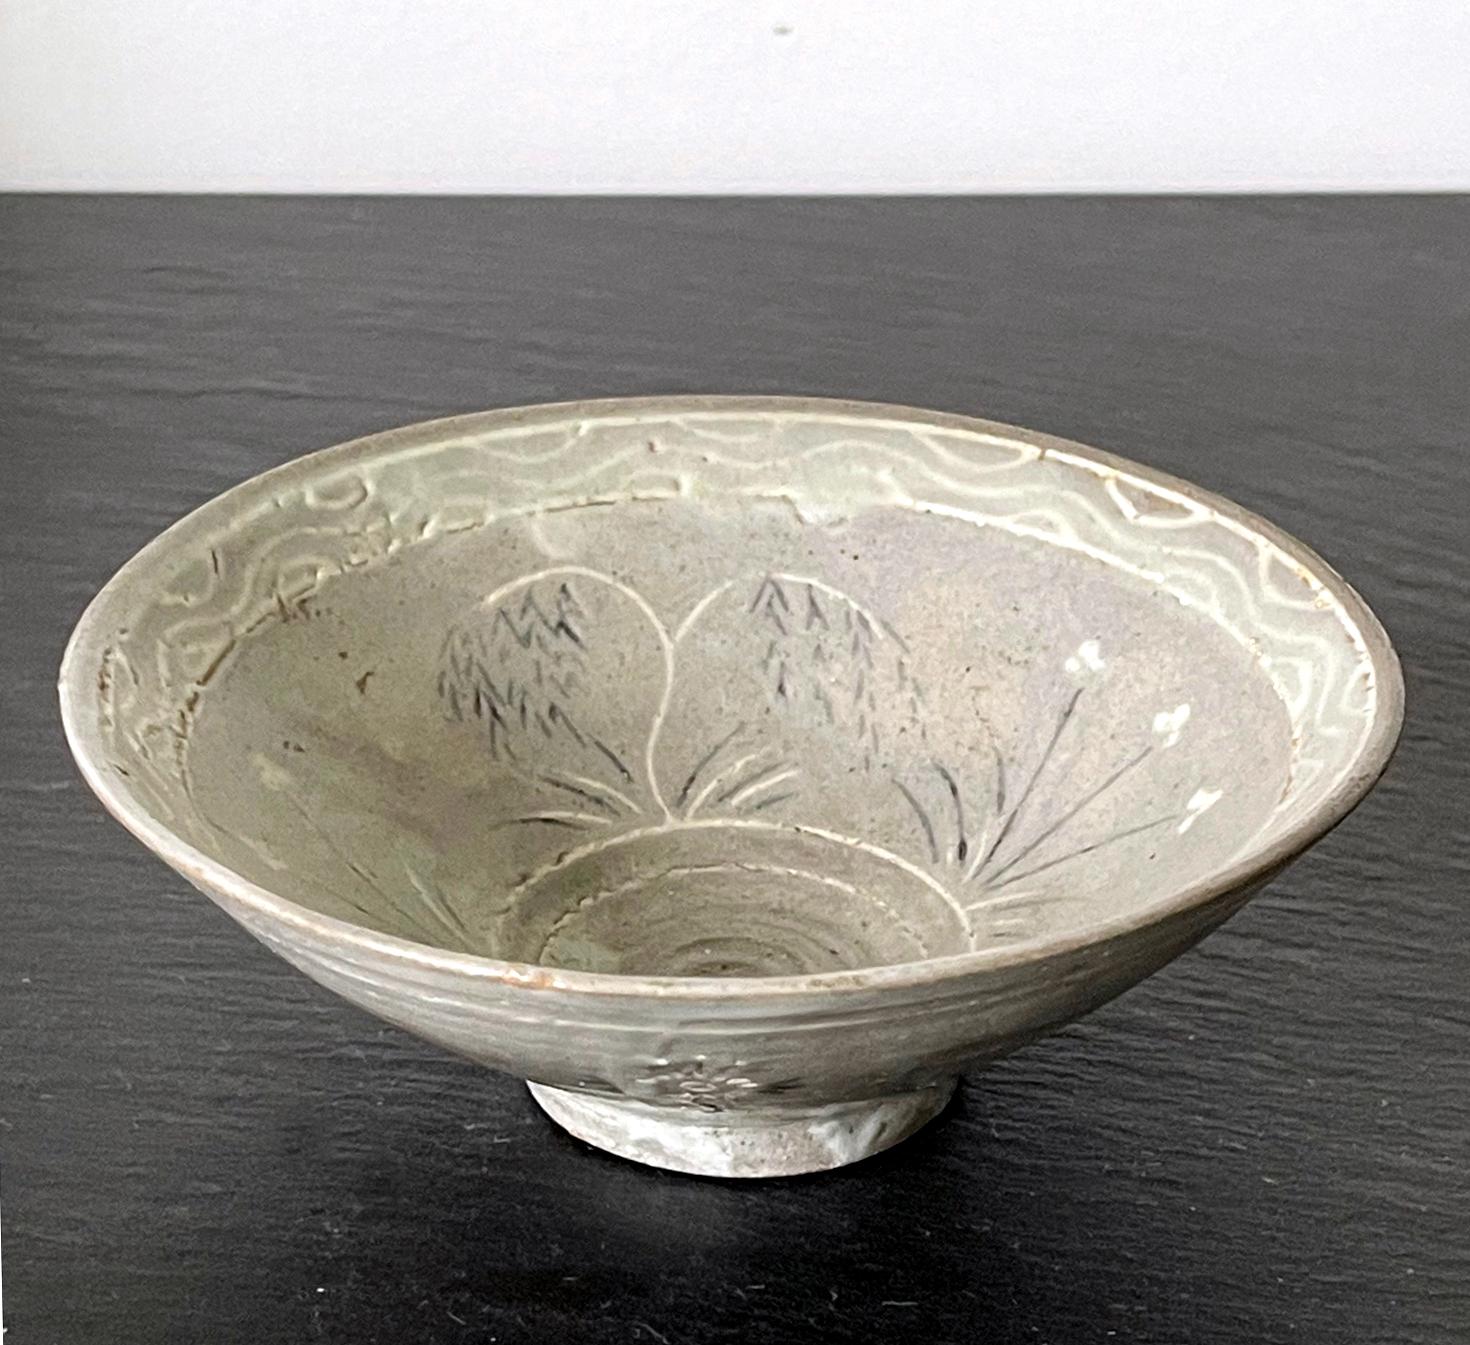 A small ceramic conical form tea bowl from Korean Goryeo Dynasty circa 14th century. The bowl is of a slightly irregular shape and covered in a grayish overglaze. The inlaid slip decoration in black and white features willow trees with weeping